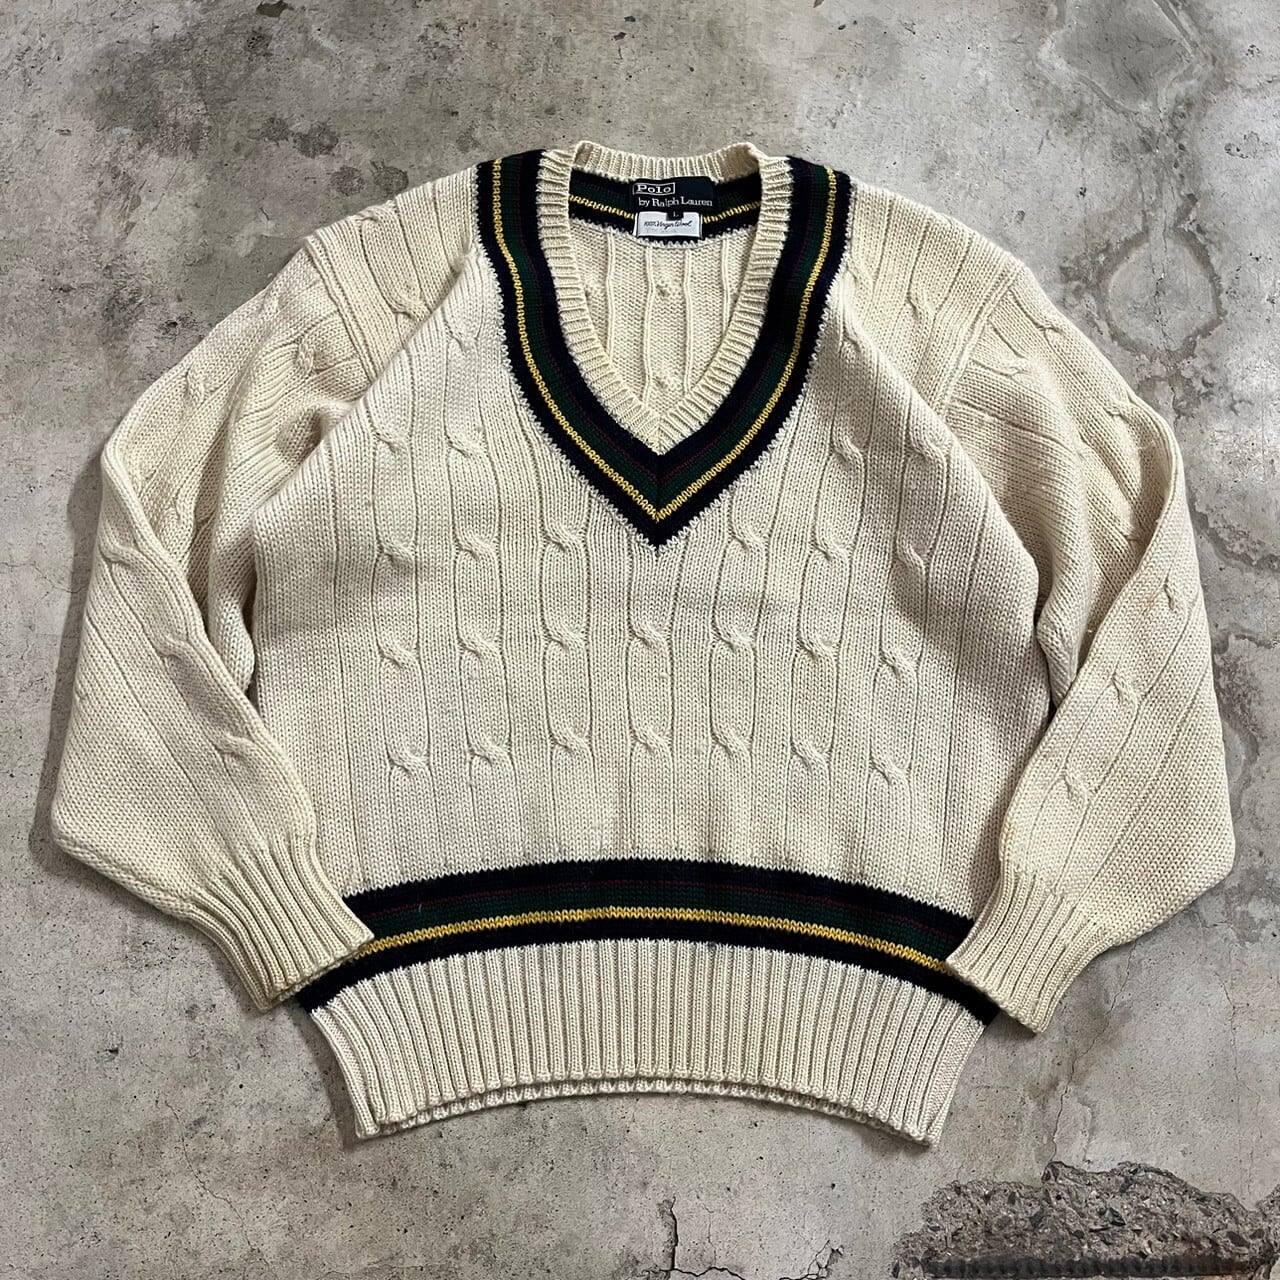 〖Polo Ralph Lauren〗90’s Vneck wool cable knit sweater /ポロラルフローレン 90年代 ウール  ケーブル ニット/lsize/#0216/osaka | 〚ETON_VINTAGE〛 powered by BASE